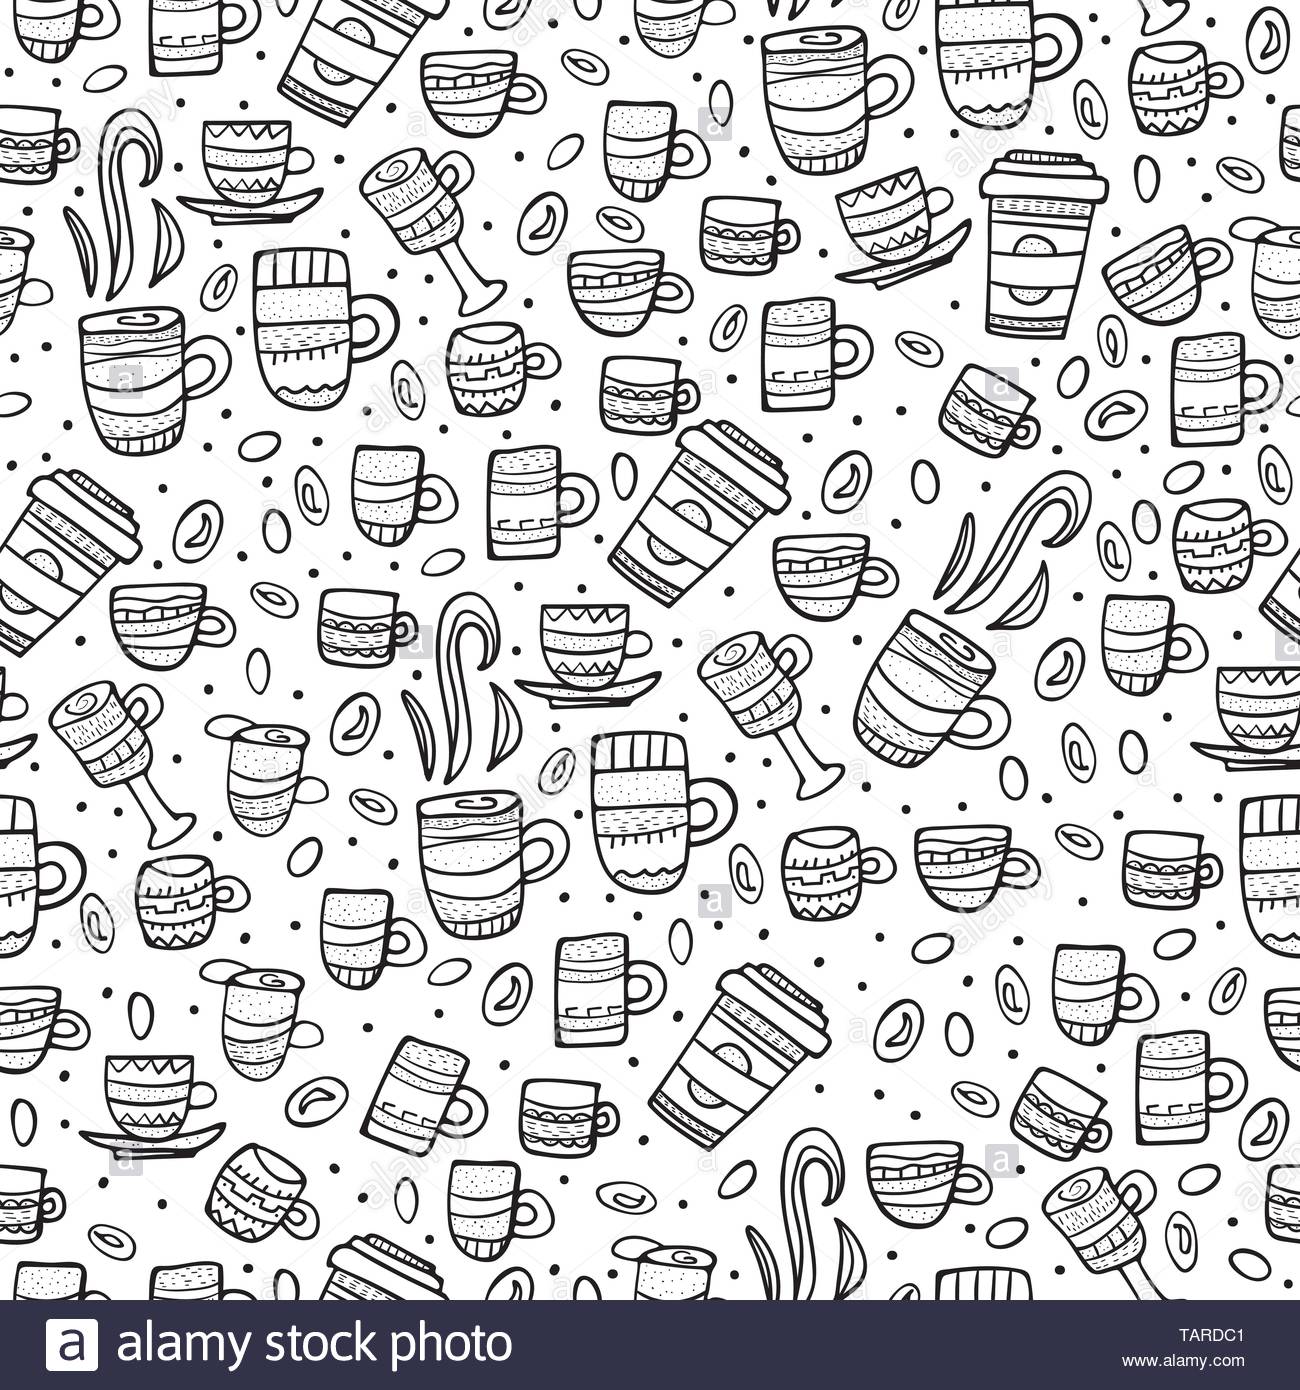 Seamless Pattern With Coffe Endless Background Of Cups Hot